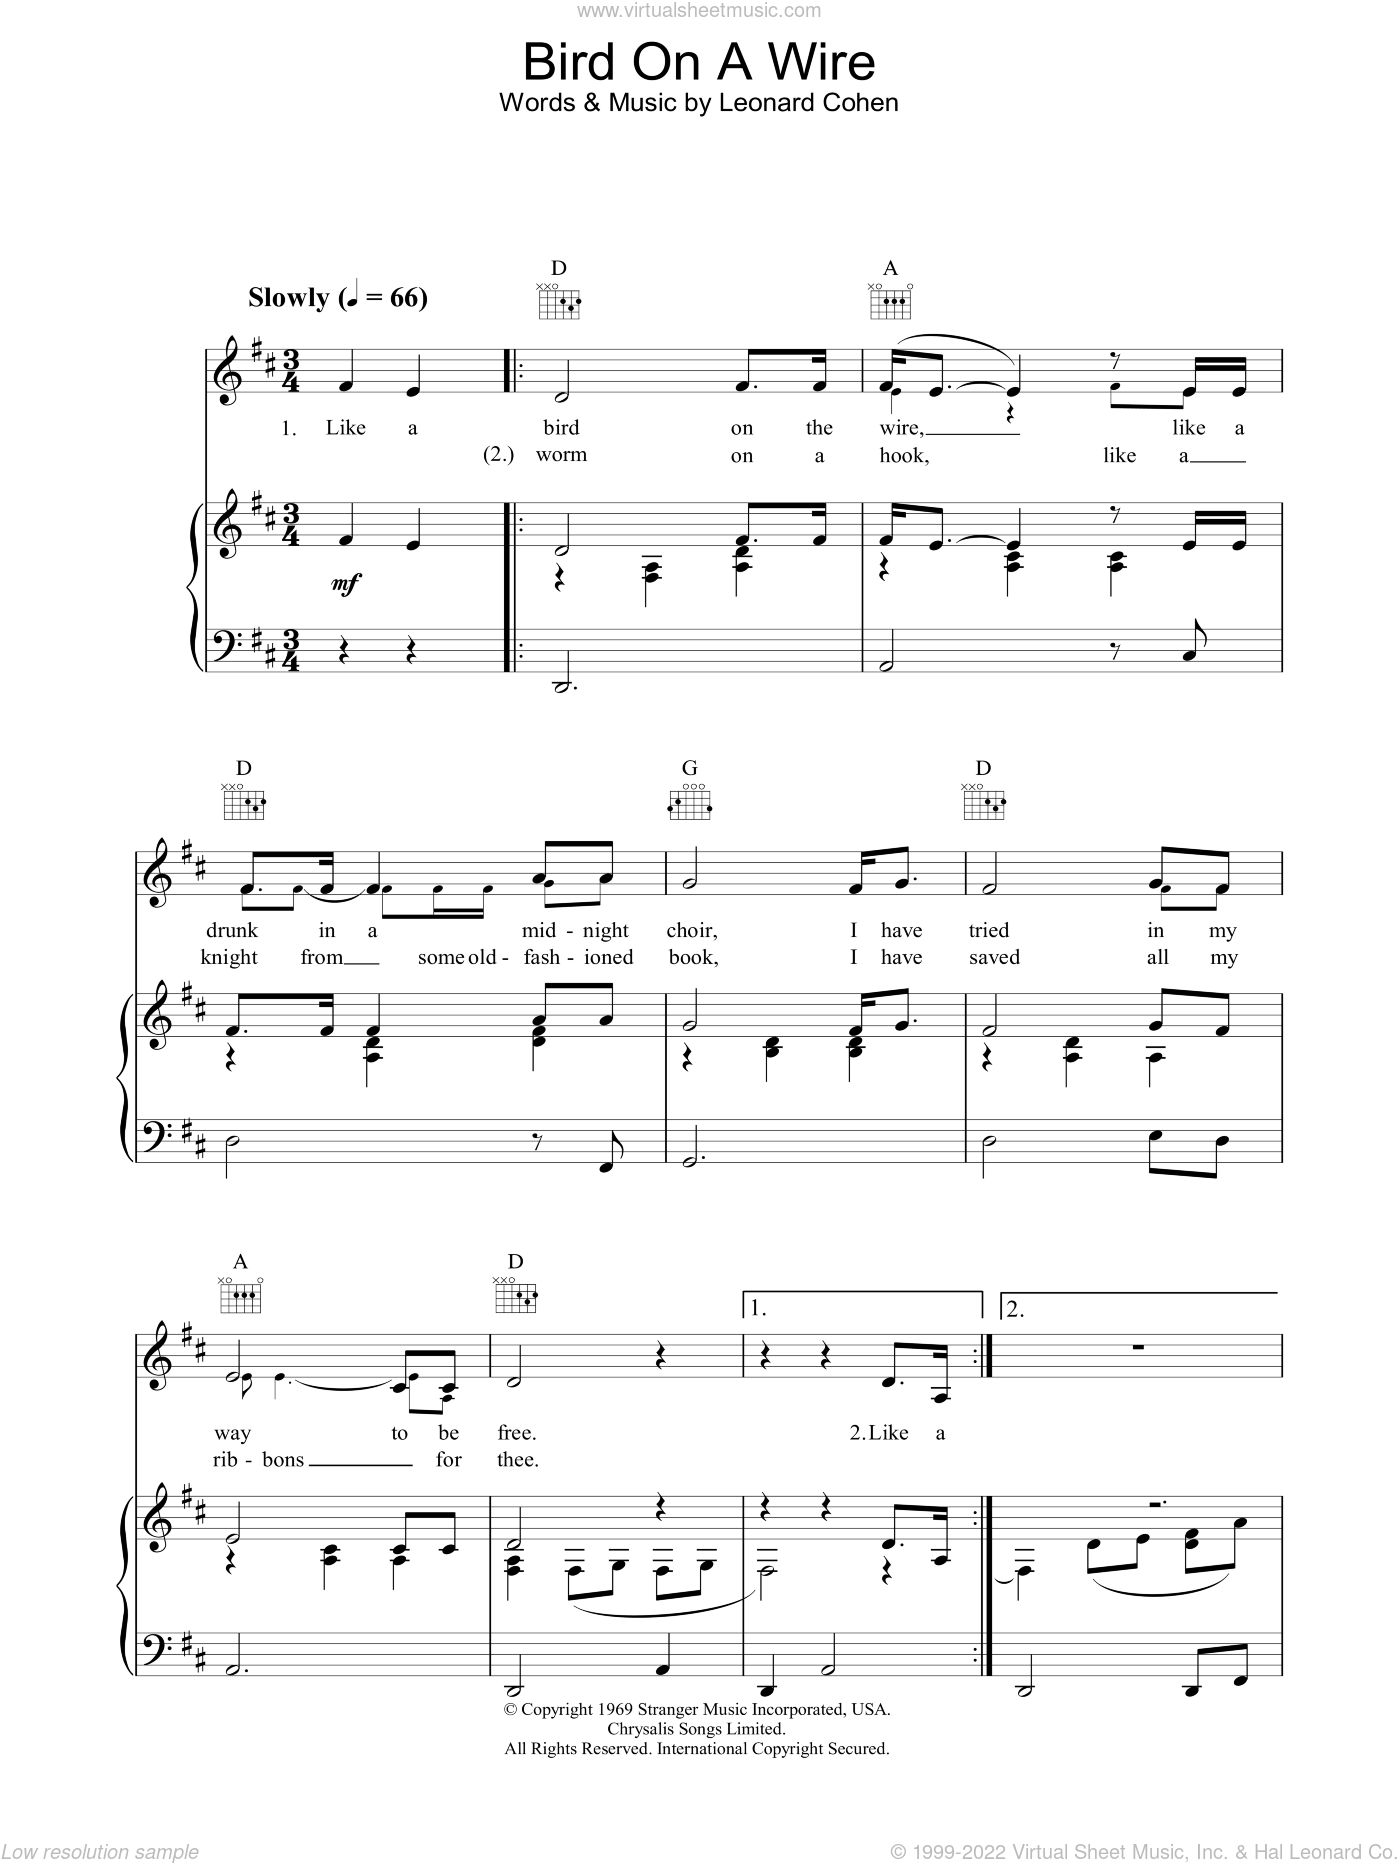 Live Wire sheet music for guitar (chords) (PDF)